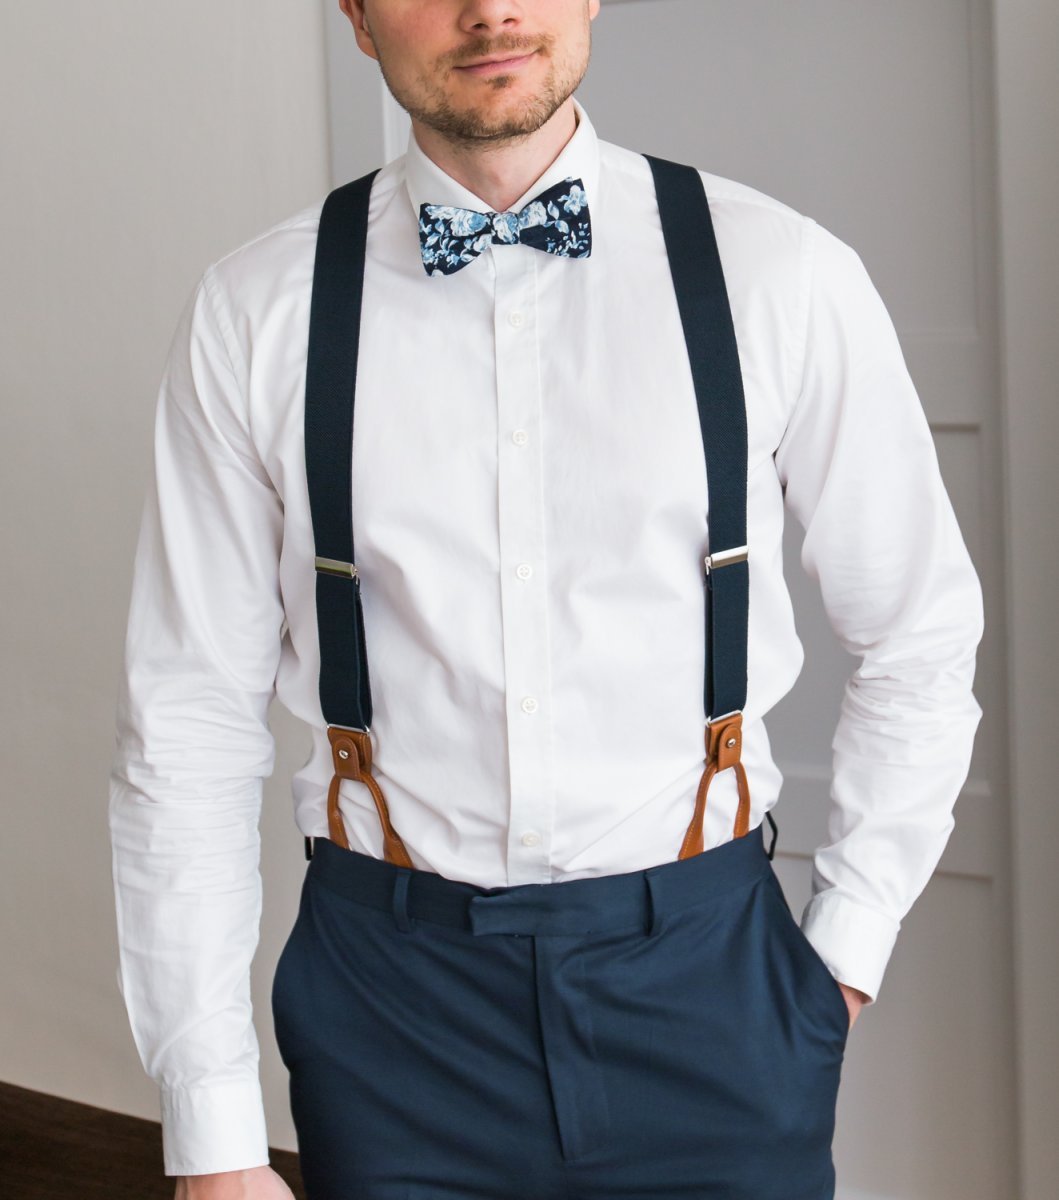 Luster Y-Back Suspenders Bow Tie Set-Pitch Onyx– Mio Marino